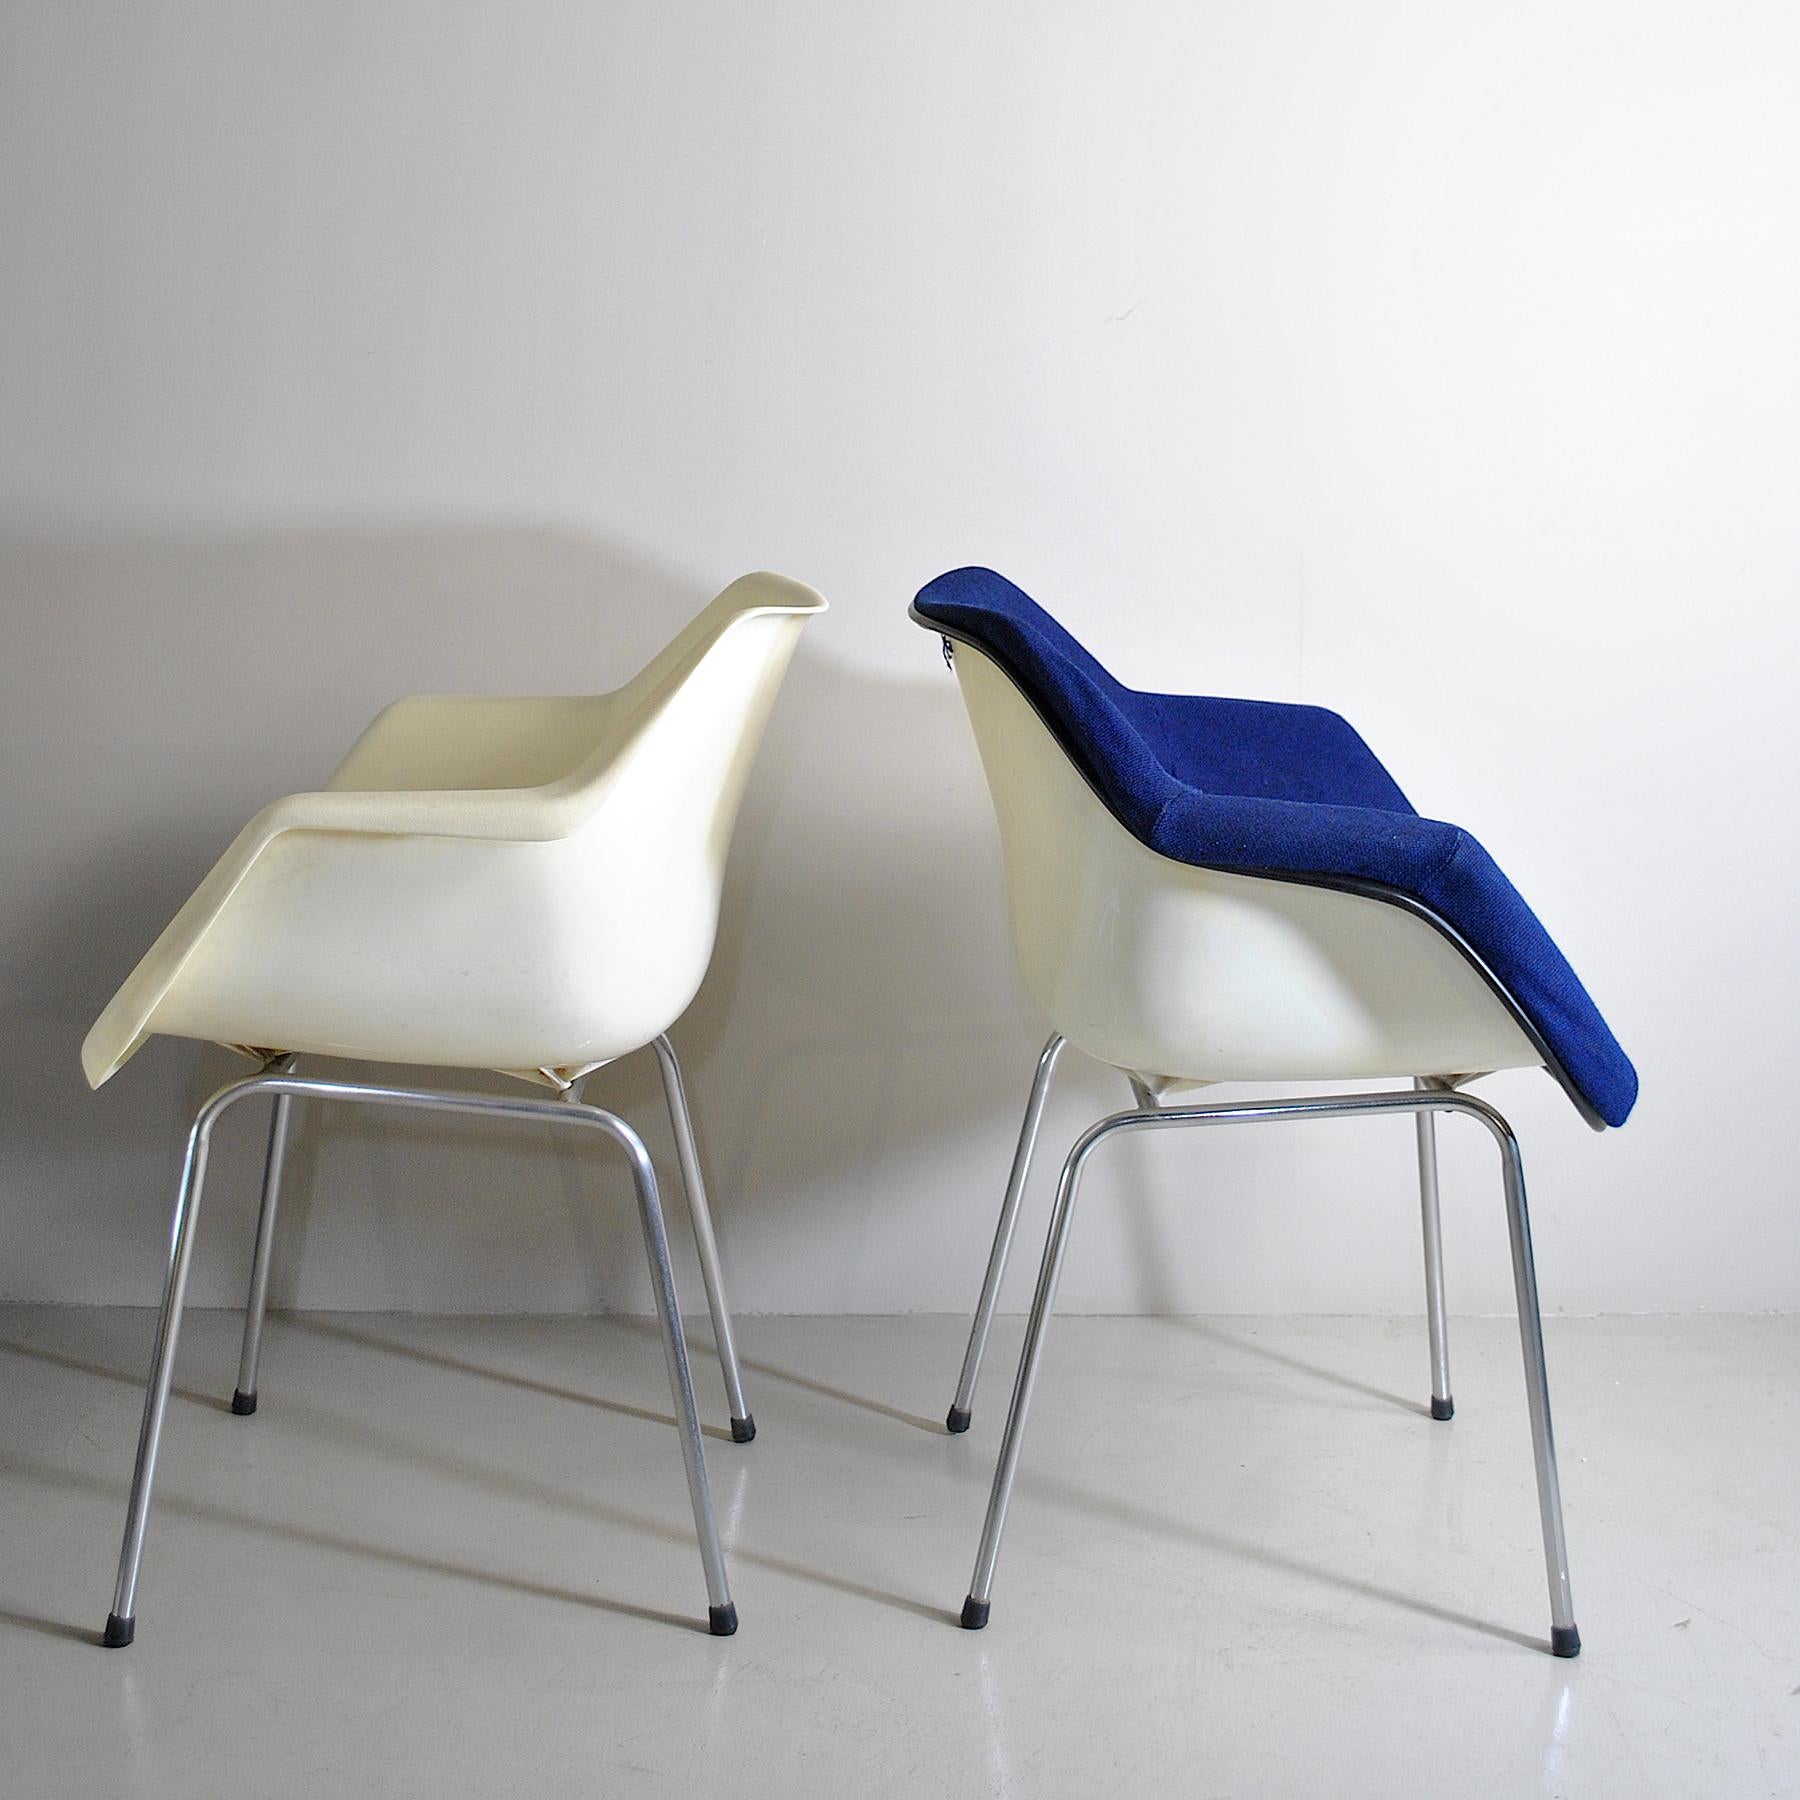 Set of six Space Age chairs produced by Hille from the 1970s by Robin Day.